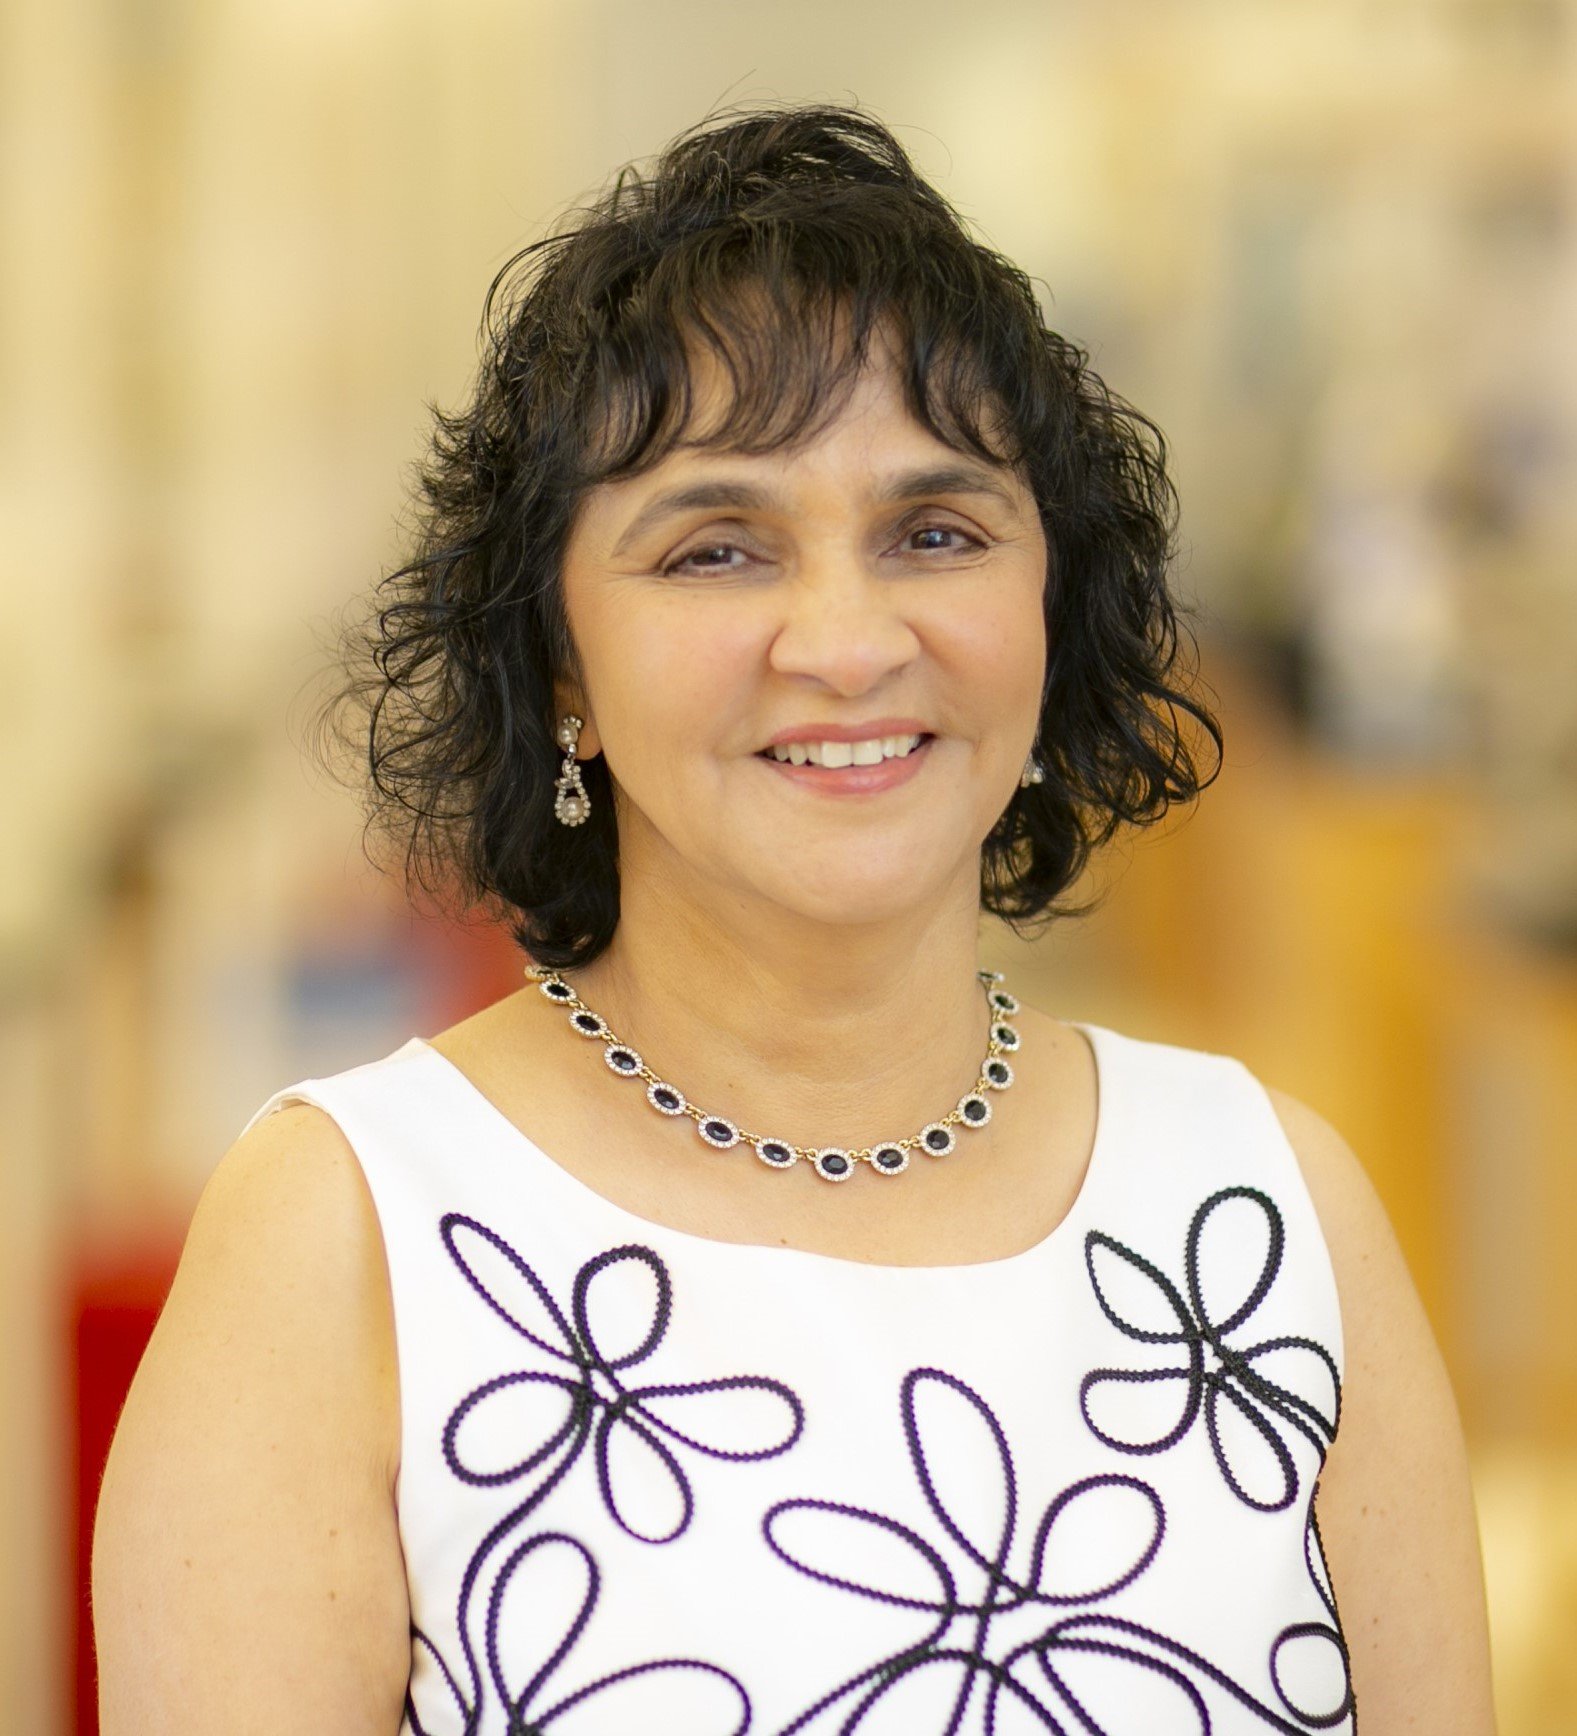 A headshot photo featuring Andrea Bottaro, PhD, assistant dean for curriculum - phase I at CMSRU.